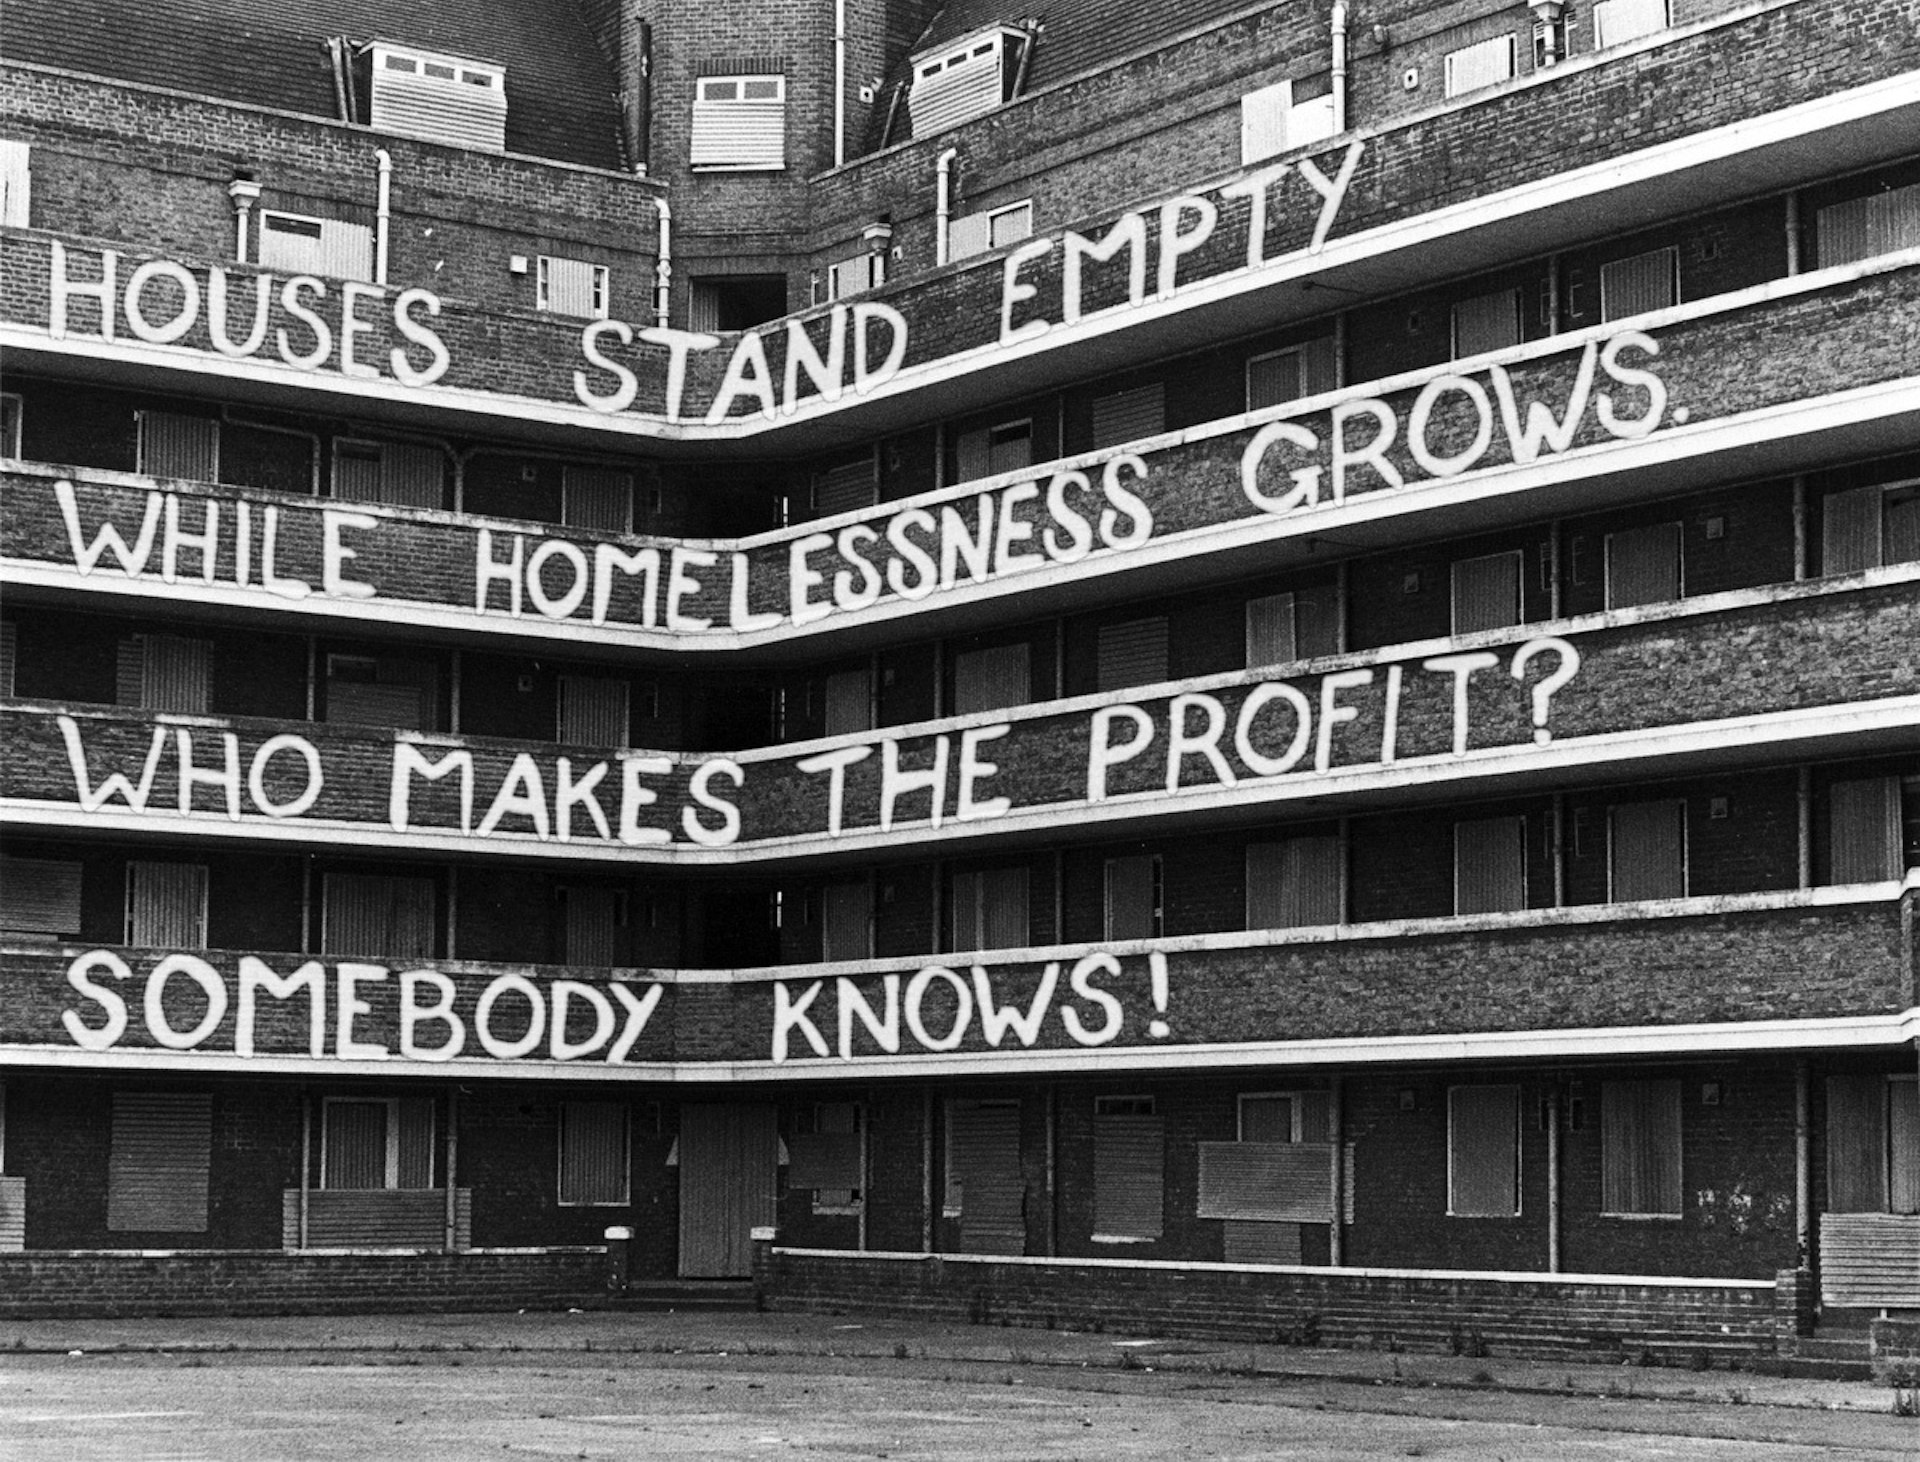 The London squatters who resisted evictions in the ‘70s